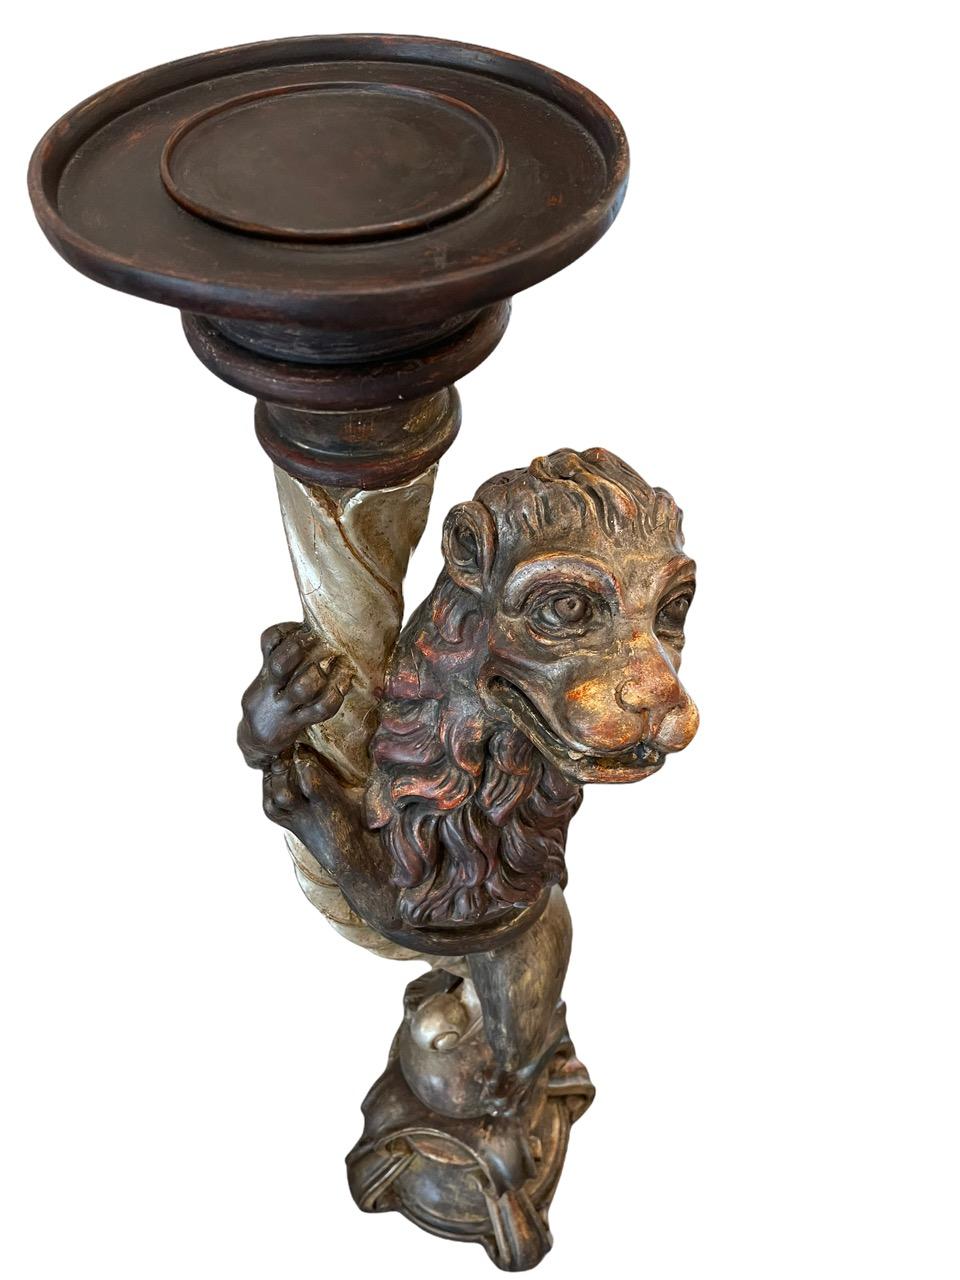 19th Century Russian Empire Carved Wood Candle Holder Sculpture For Sale 3